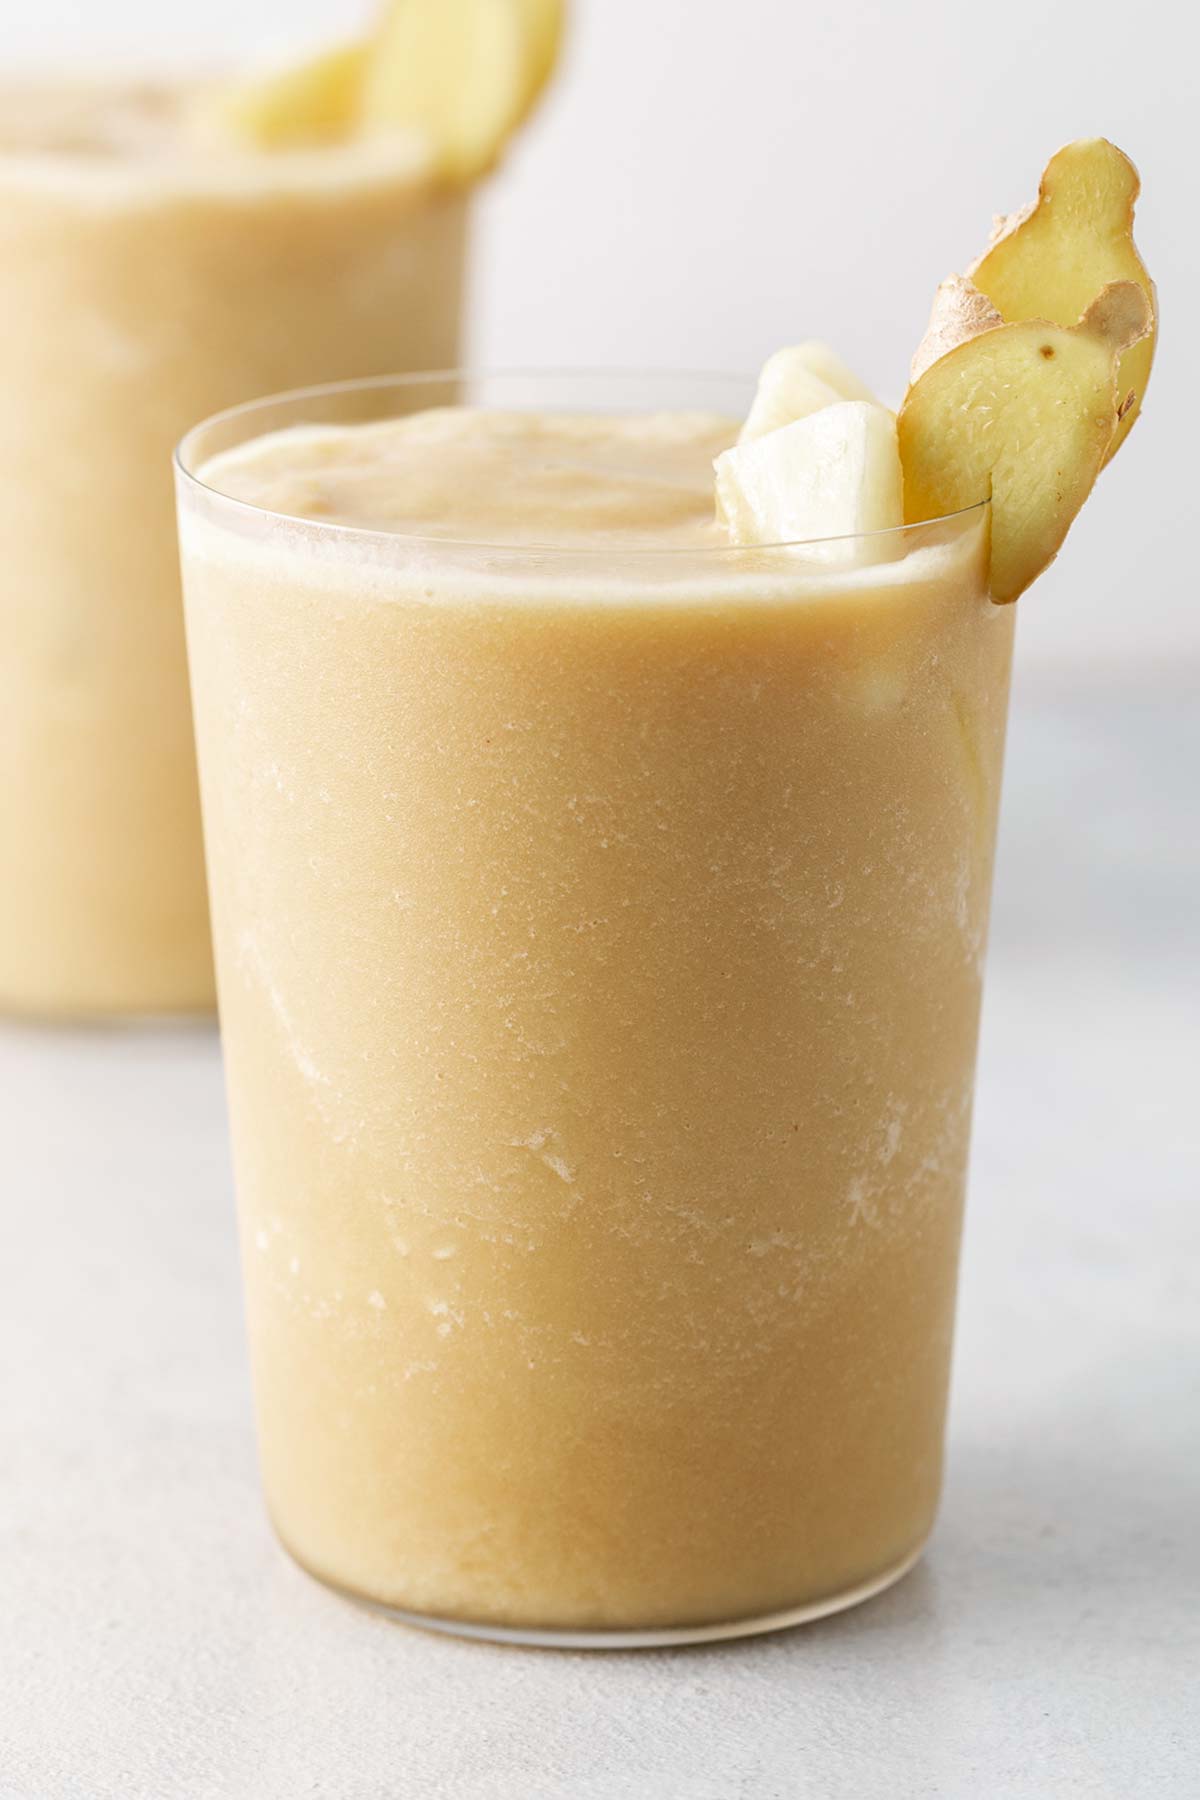 Pineapple ginger smoothie in a glass.